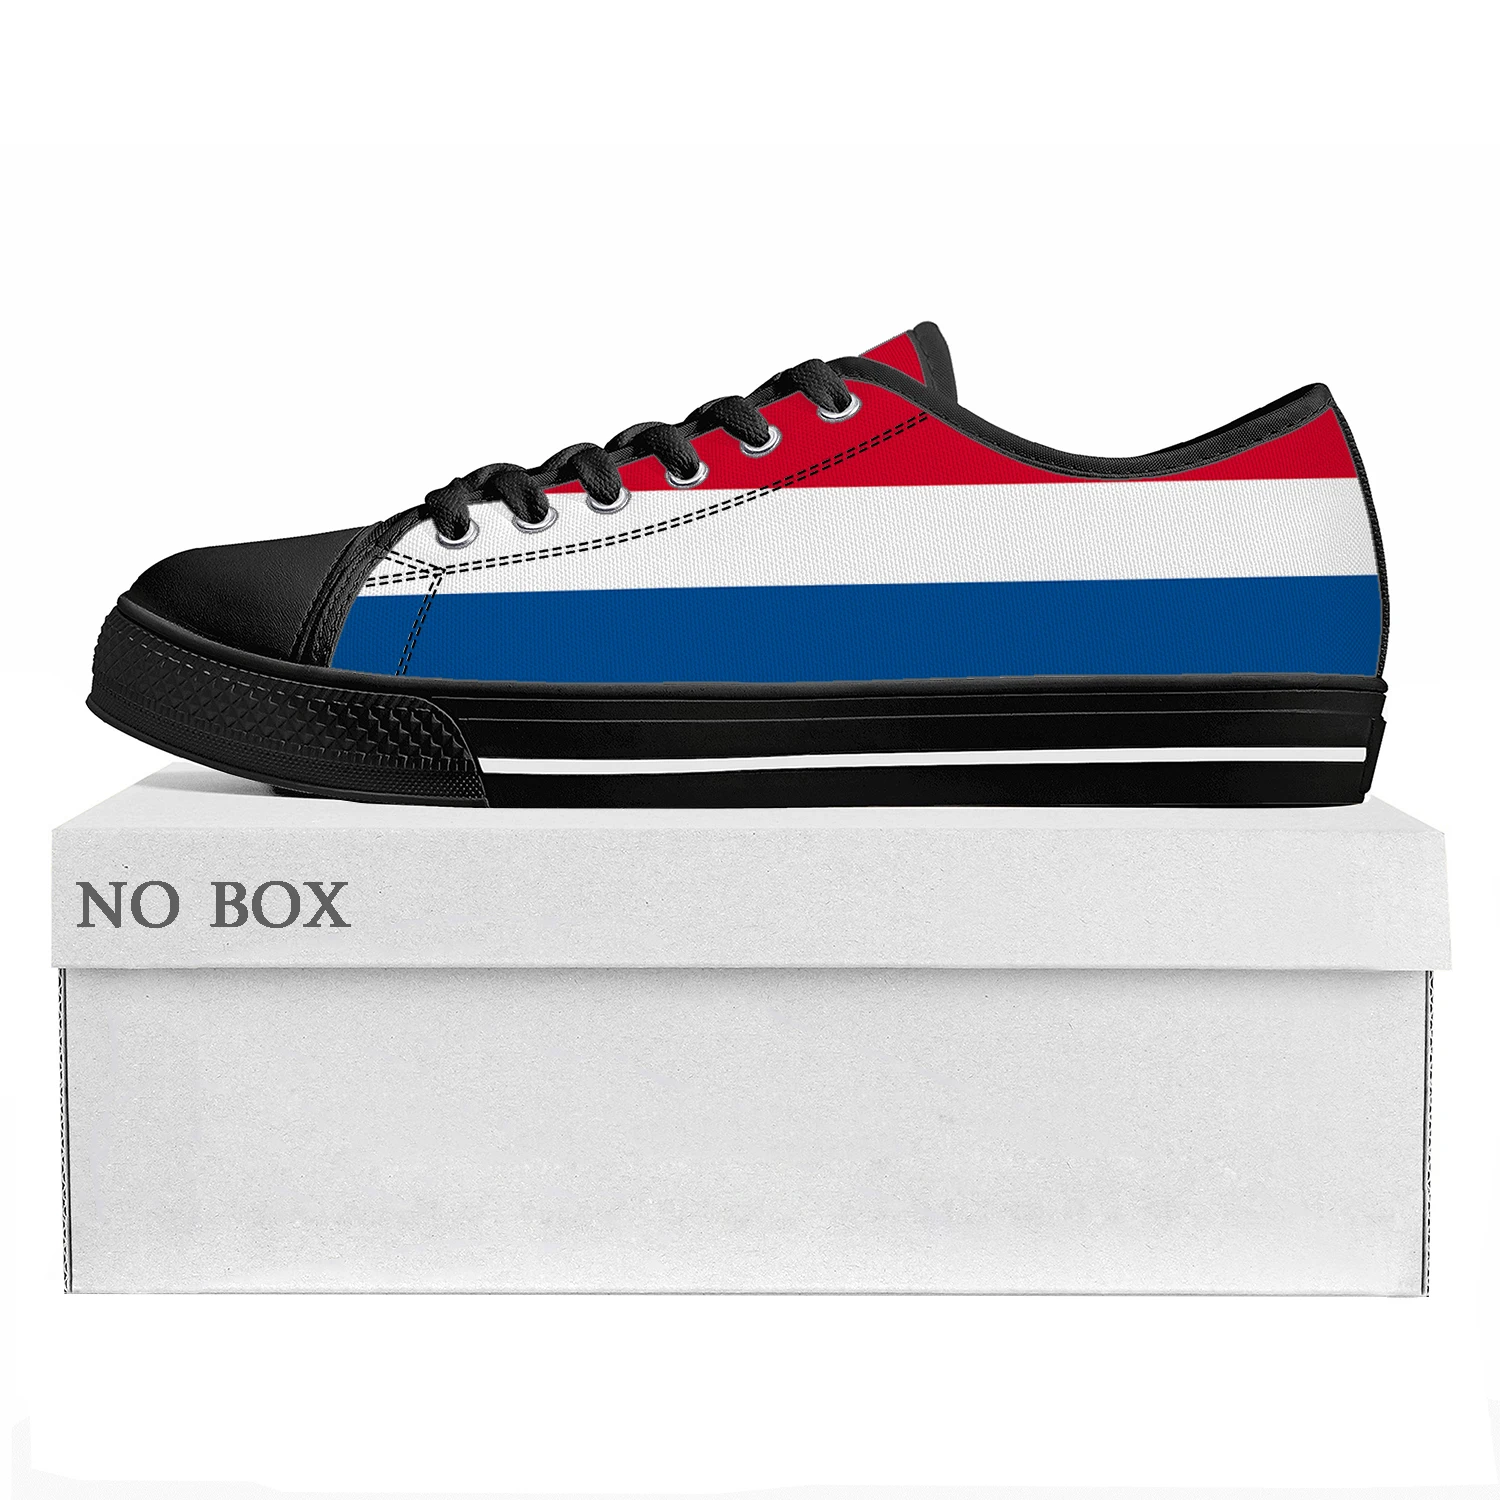 

Dutch Flag Low Top High Quality Sneakers Mens Womens Teenager Canvas Sneaker Netherlands Prode Casual Couple Shoes Custom Shoe